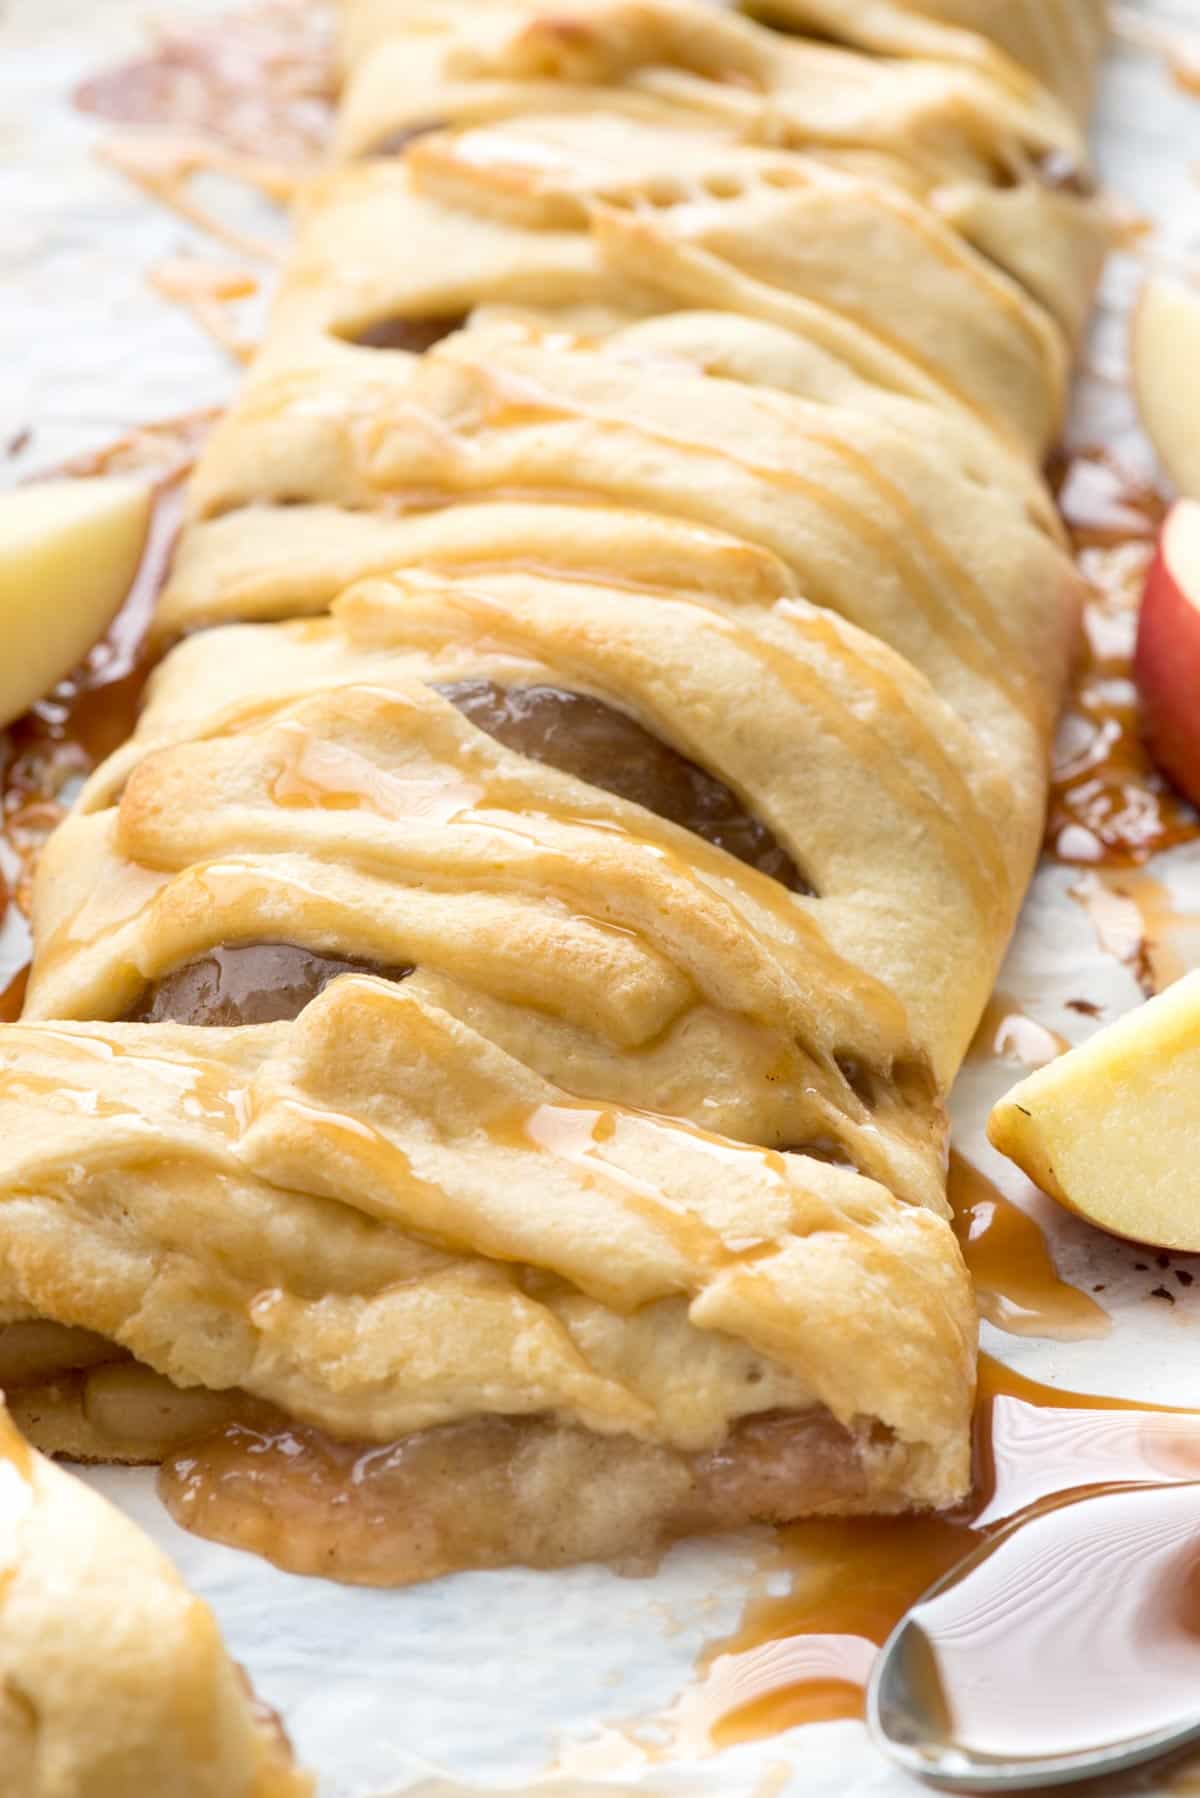 Easy Caramel Apple Strudel Recipe with just 3 ingredients!